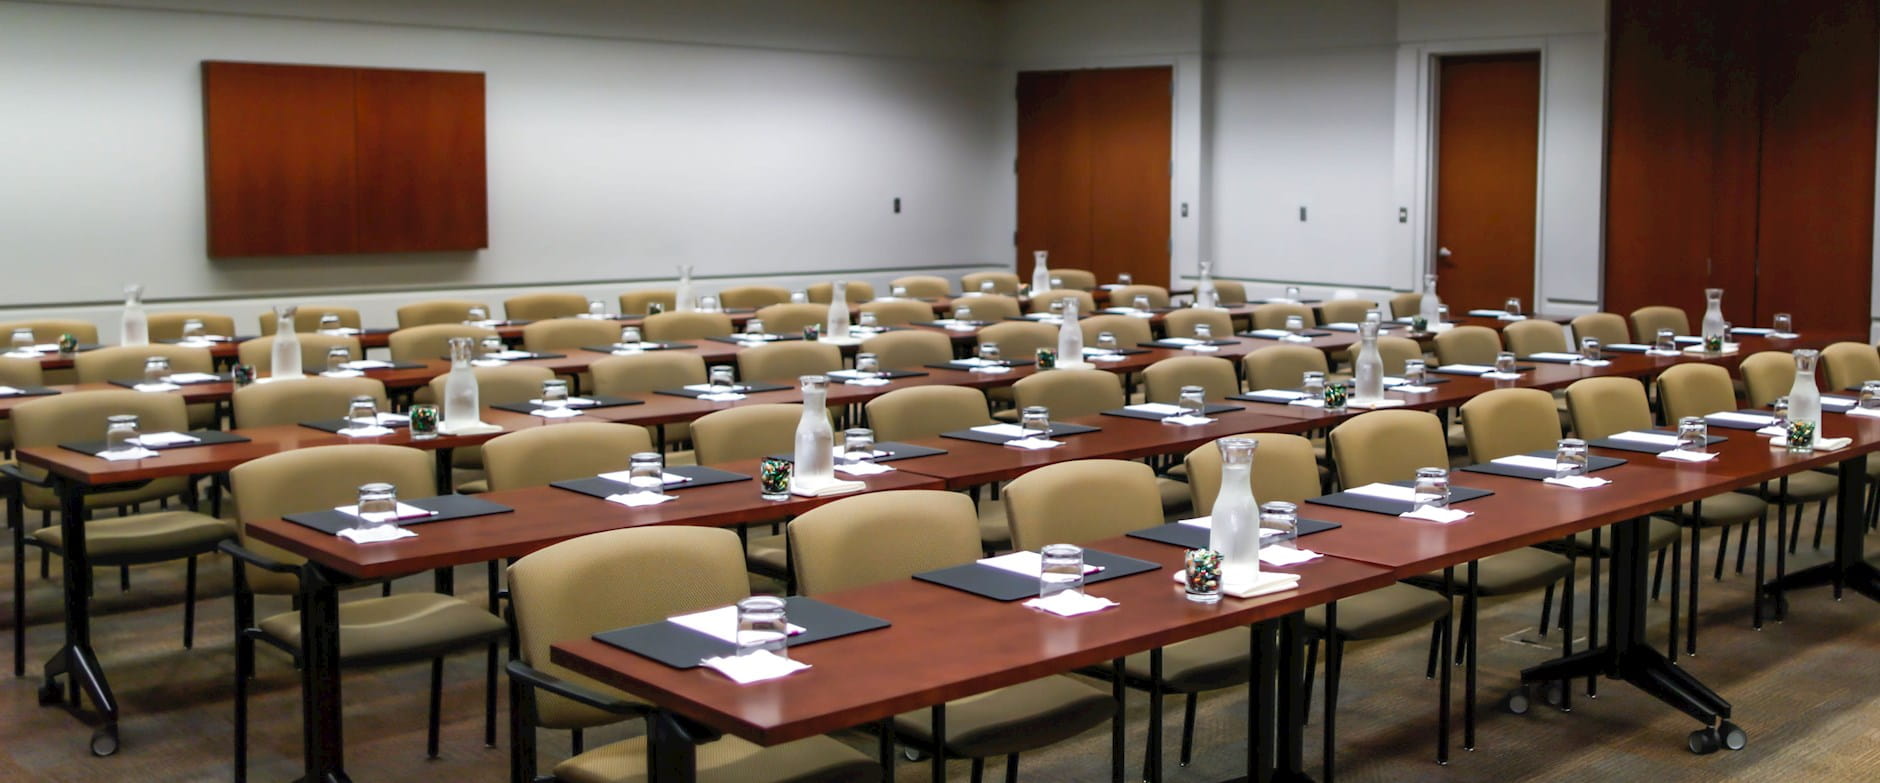 Rows of tables and chairs from the front of an executive meeting room in Gleacher Center